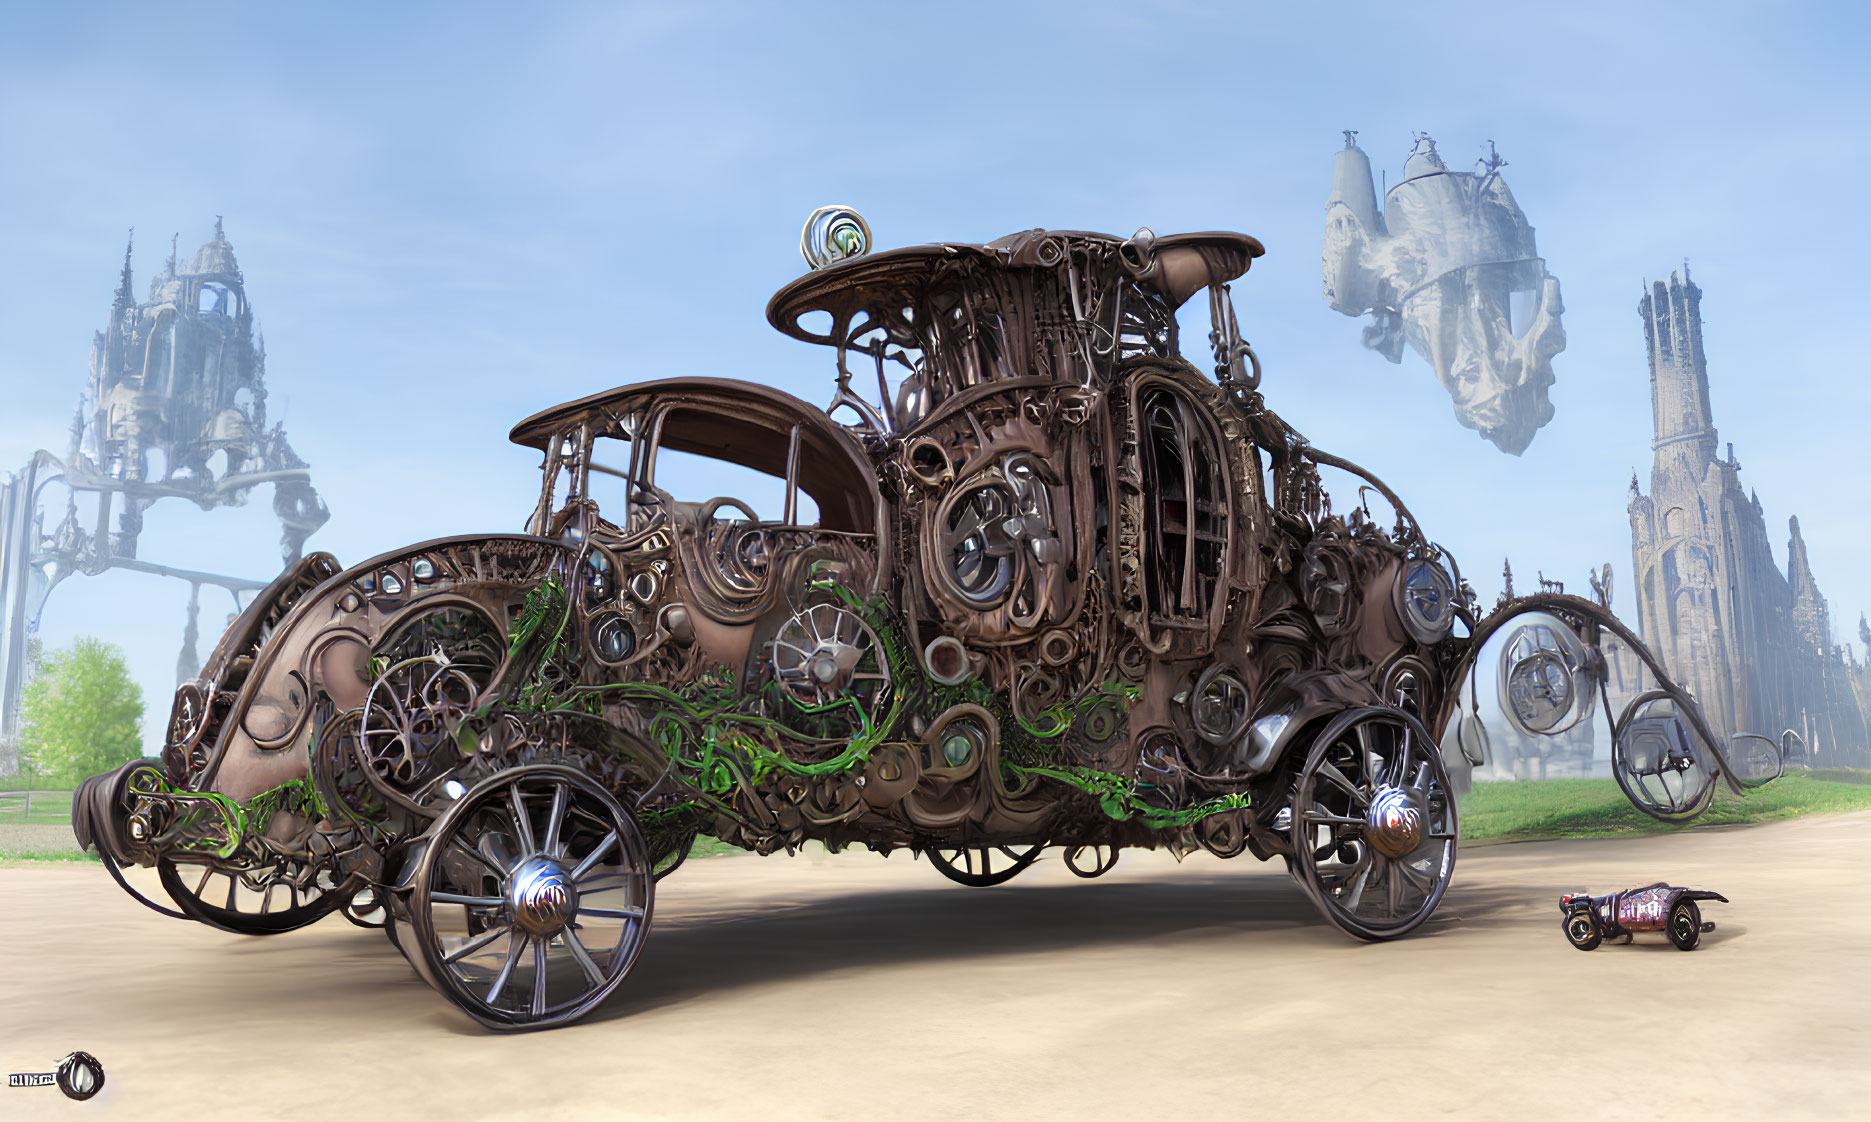 Steampunk-style vehicle with intricate gears and mechanical parts amid flying airships